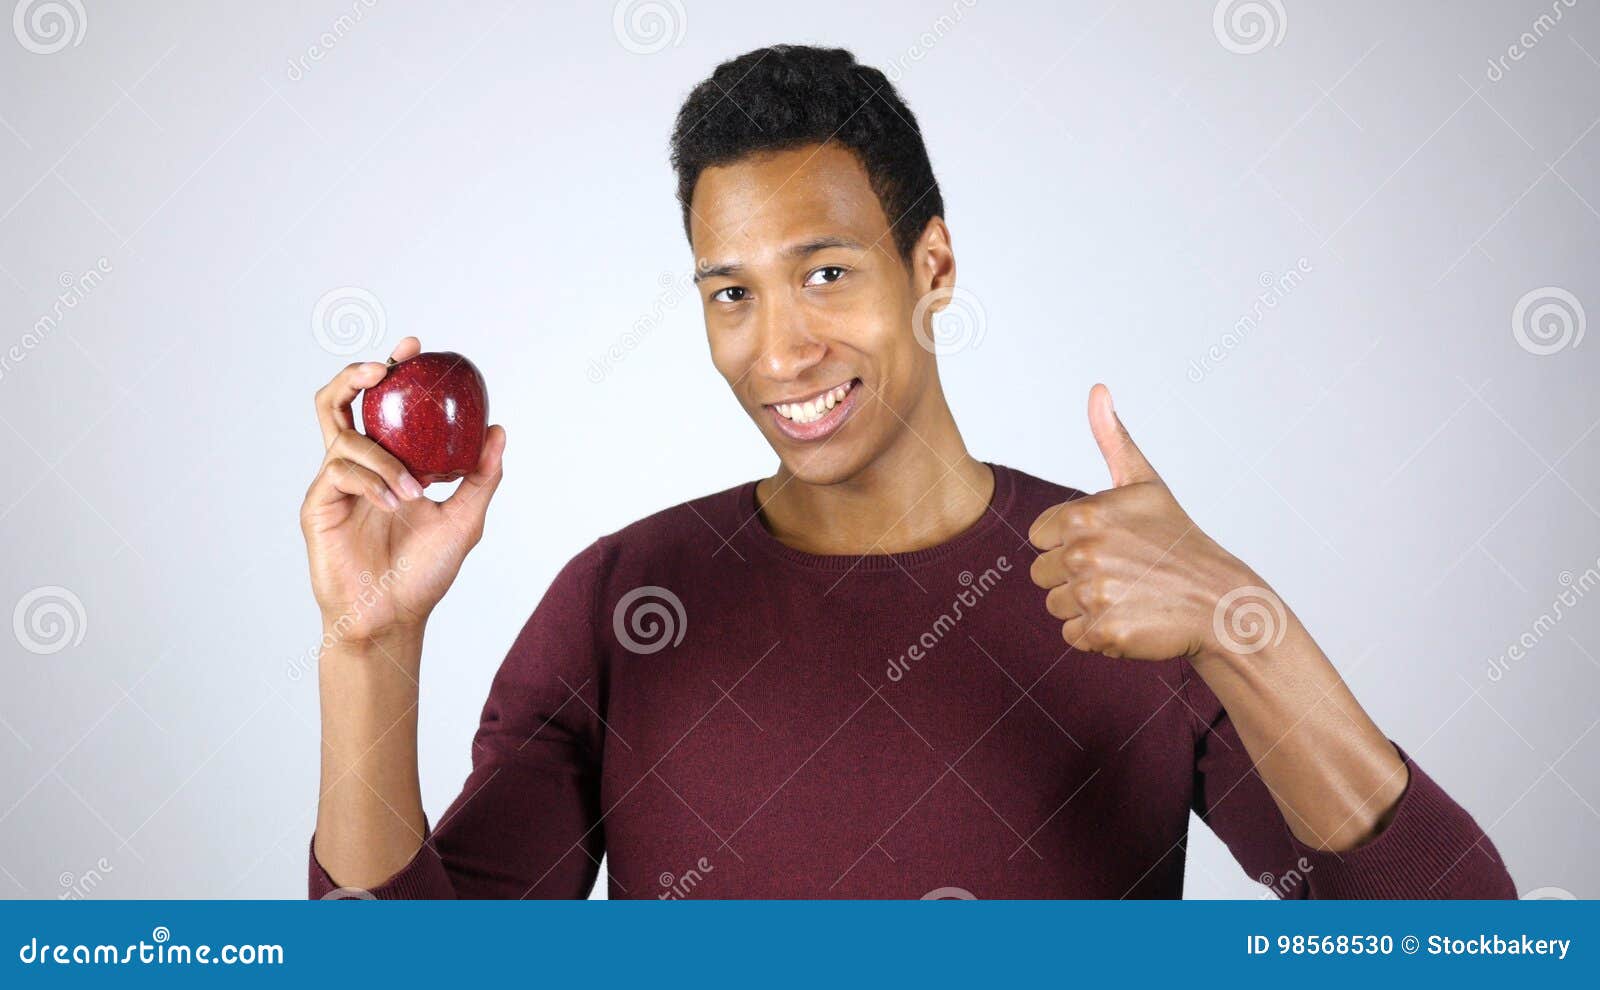 Healthy Lifestyle, Afro-American Man Showing Red Apple and Thumbs Up ...